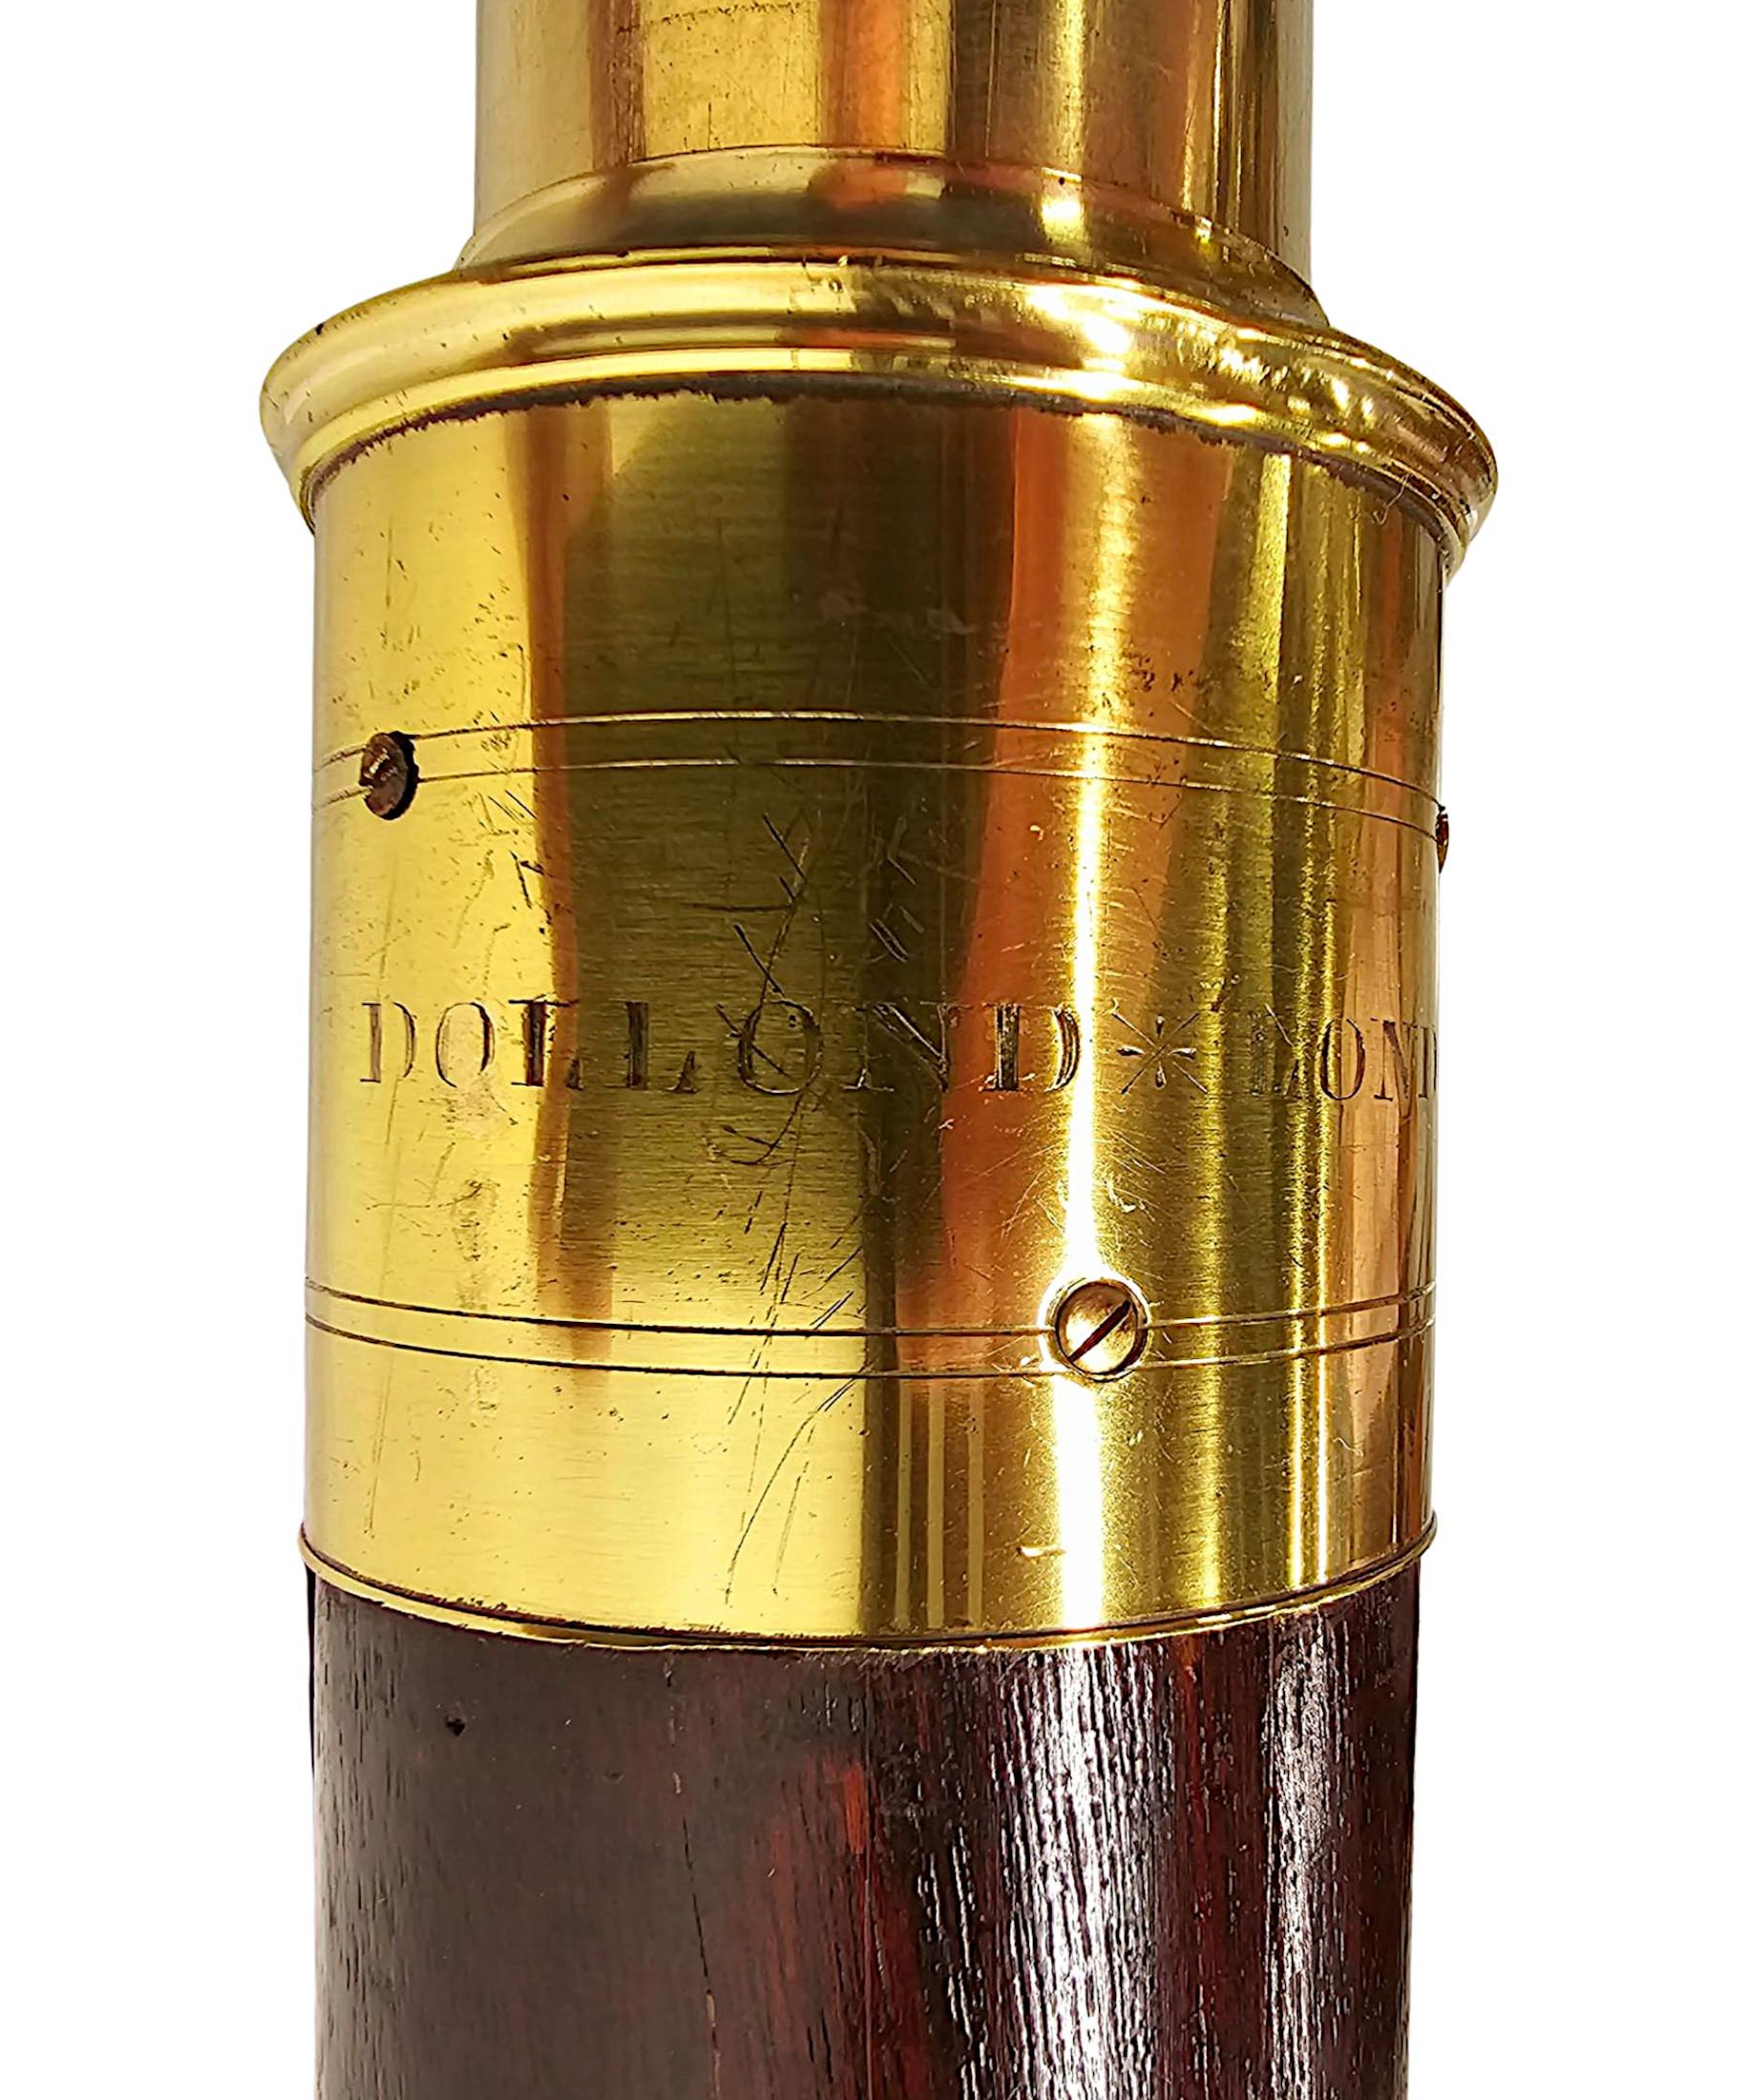 English A Very Rare and Fine Early 19th Century Telescope by Dolland London